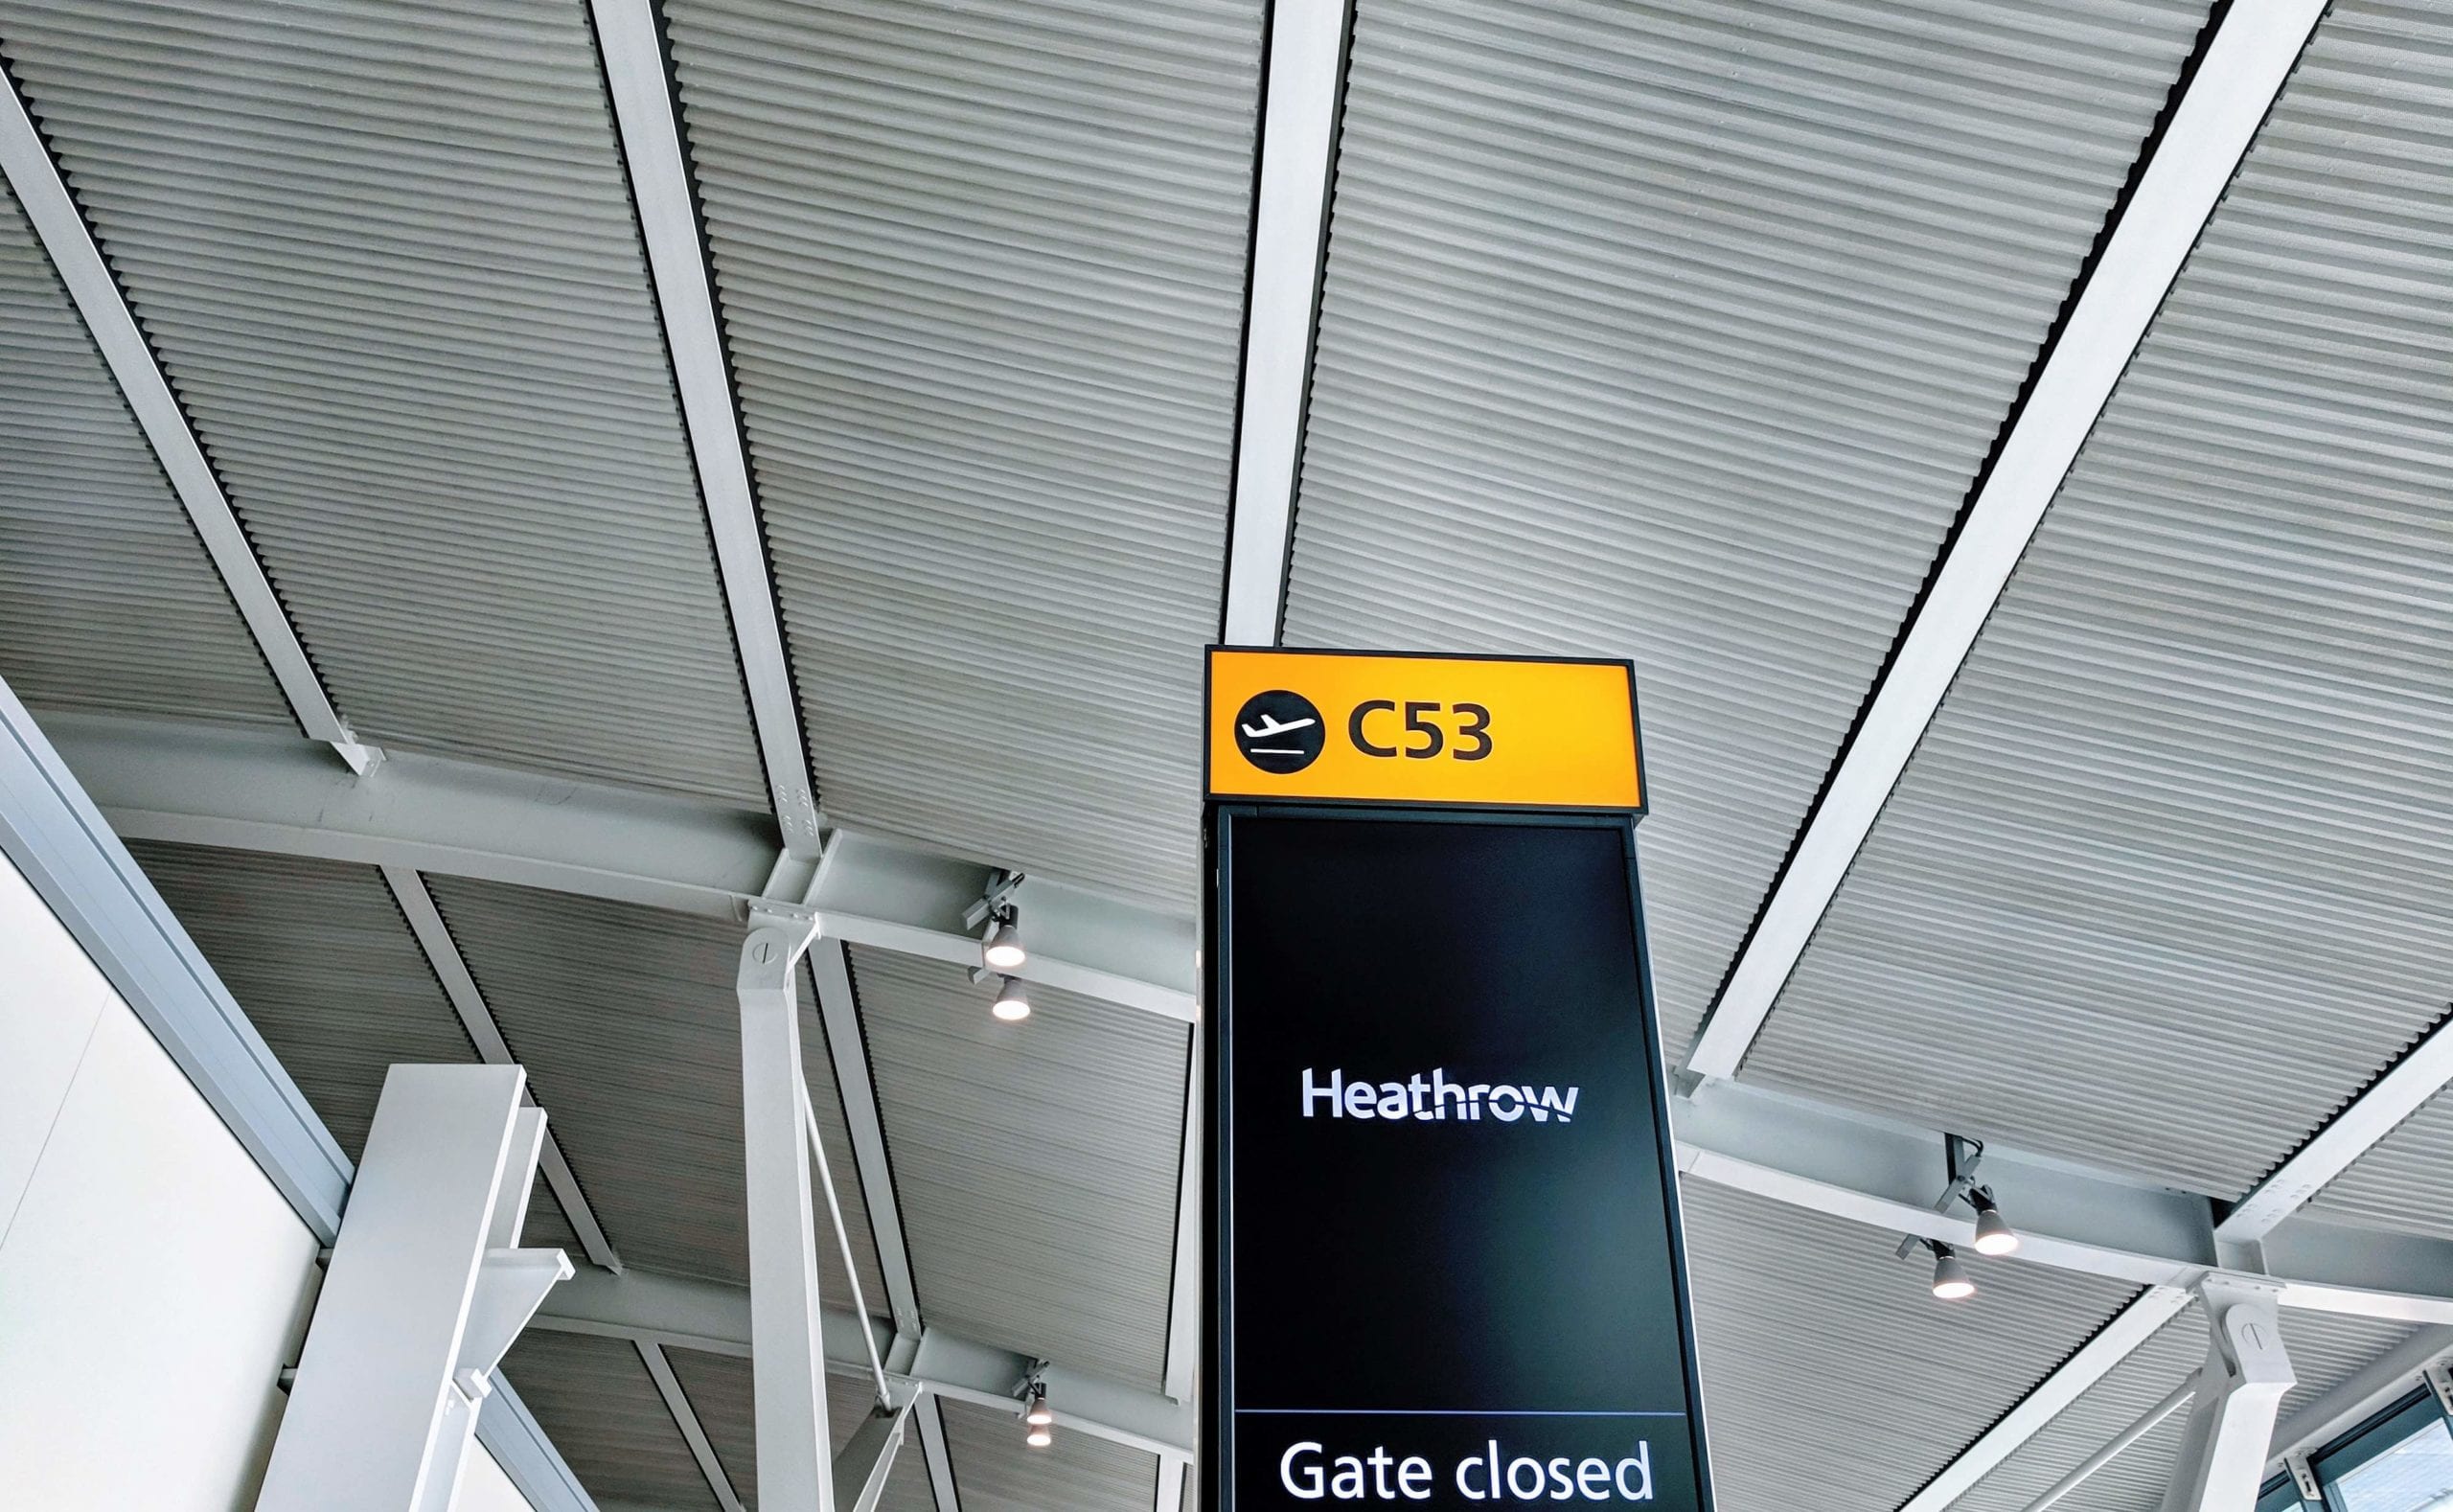 Opinion: Heathrow Should Have To Call Passengers About Cancellations